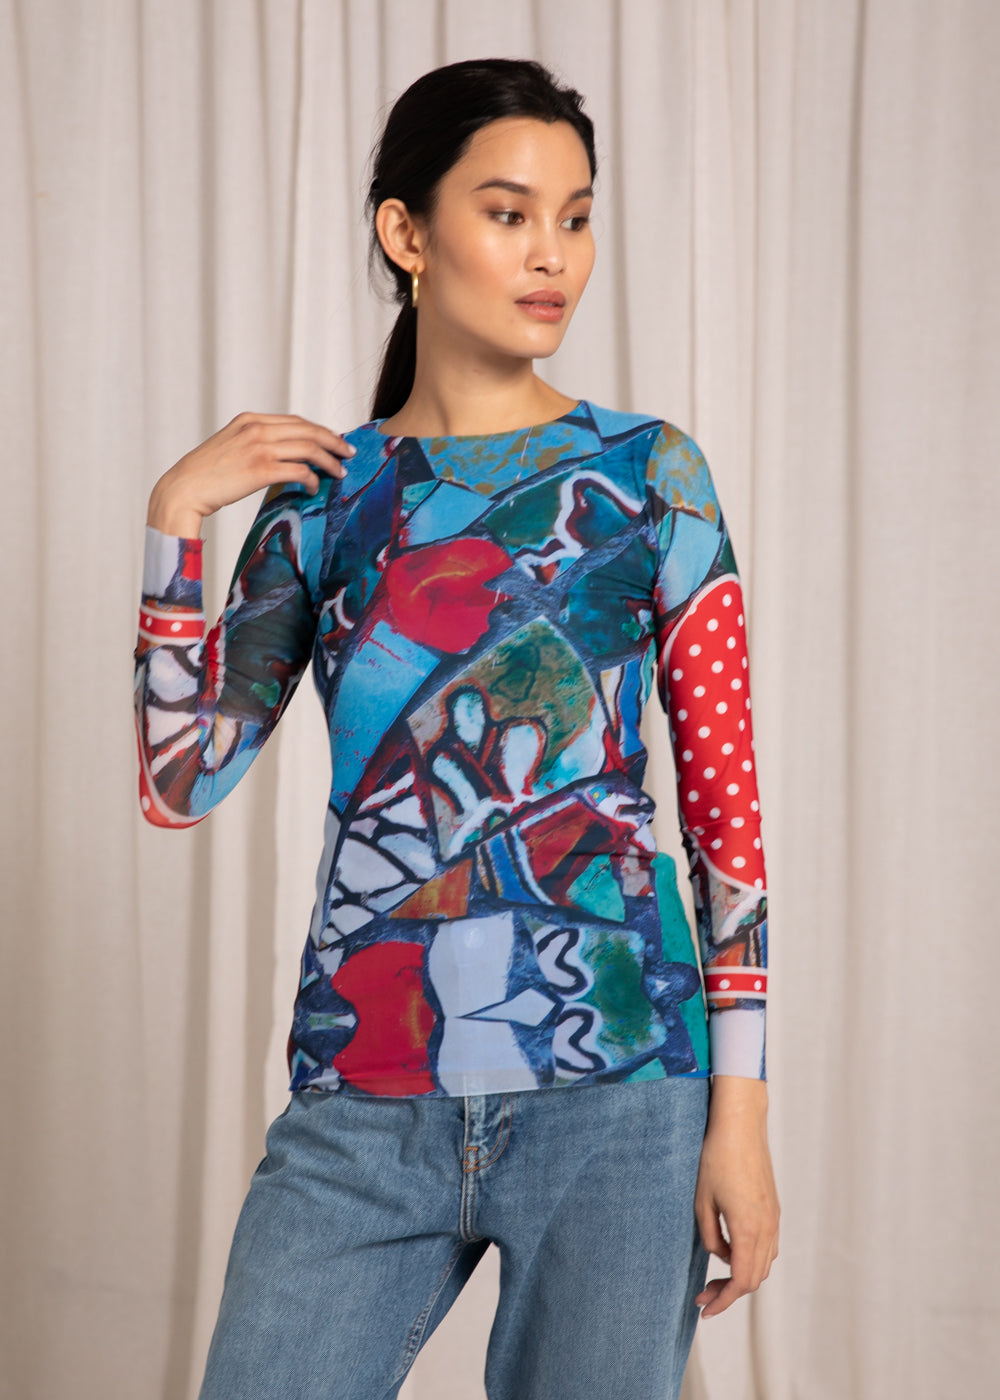 Mosaic Florence - Florence Double Sheer Top